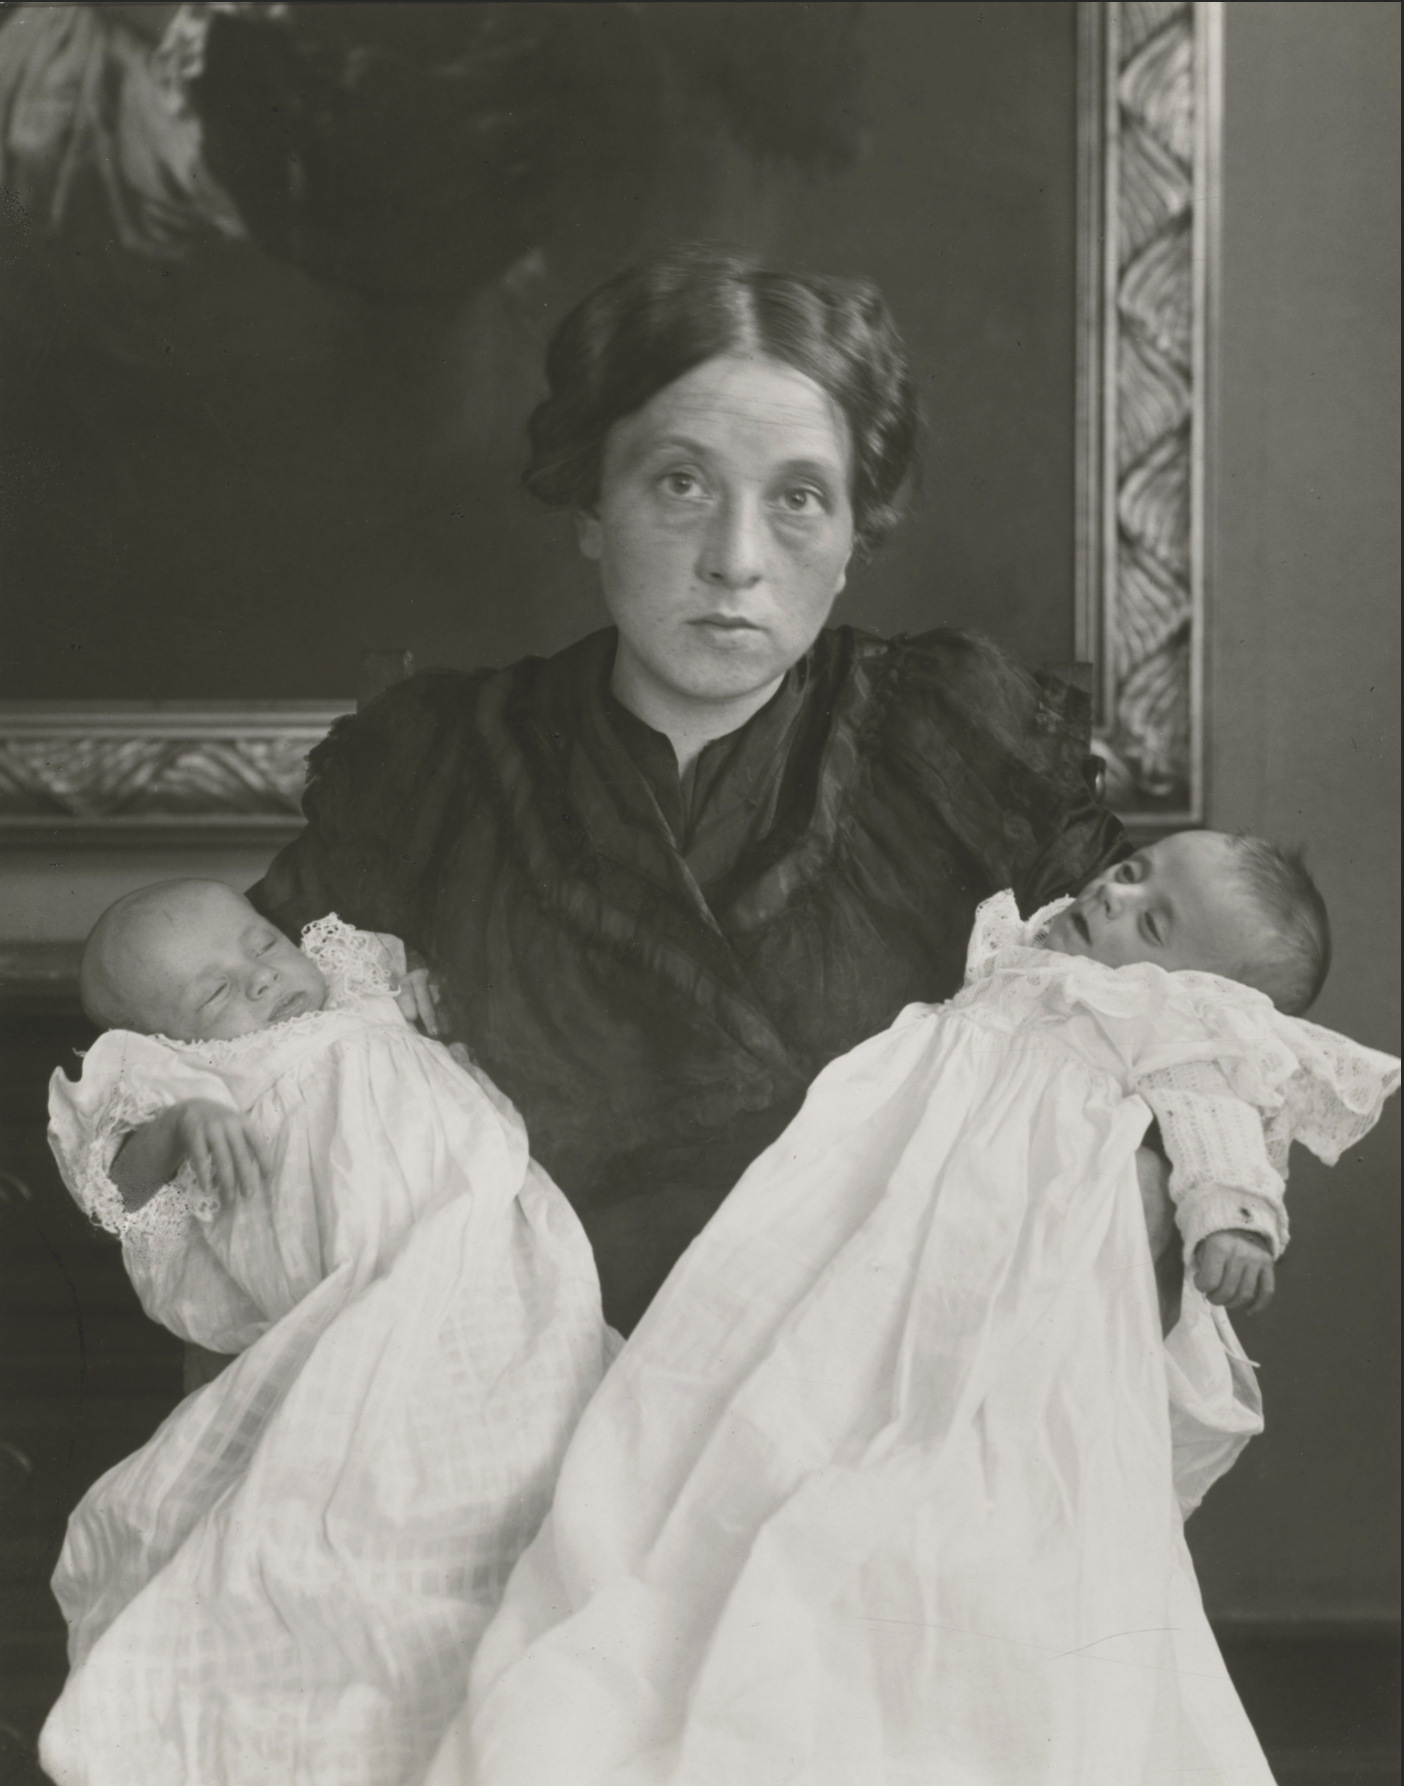 August Sander, The Mother and Joy in Grief, Gelatin silver print, 11 x 8 11/16" (28 x 22cm) ¹   